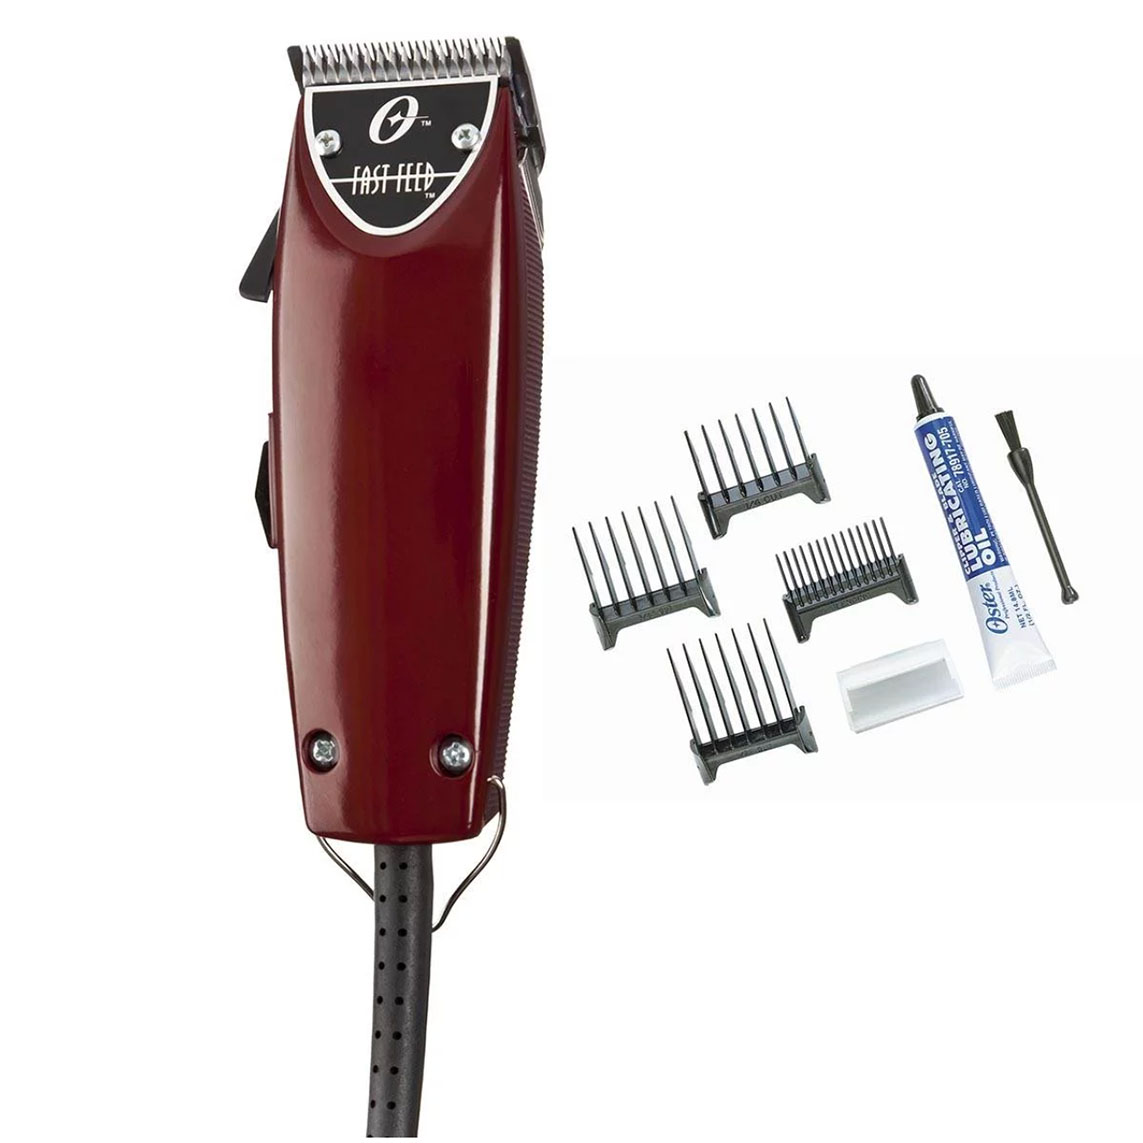 Red Hair clipper with accessories